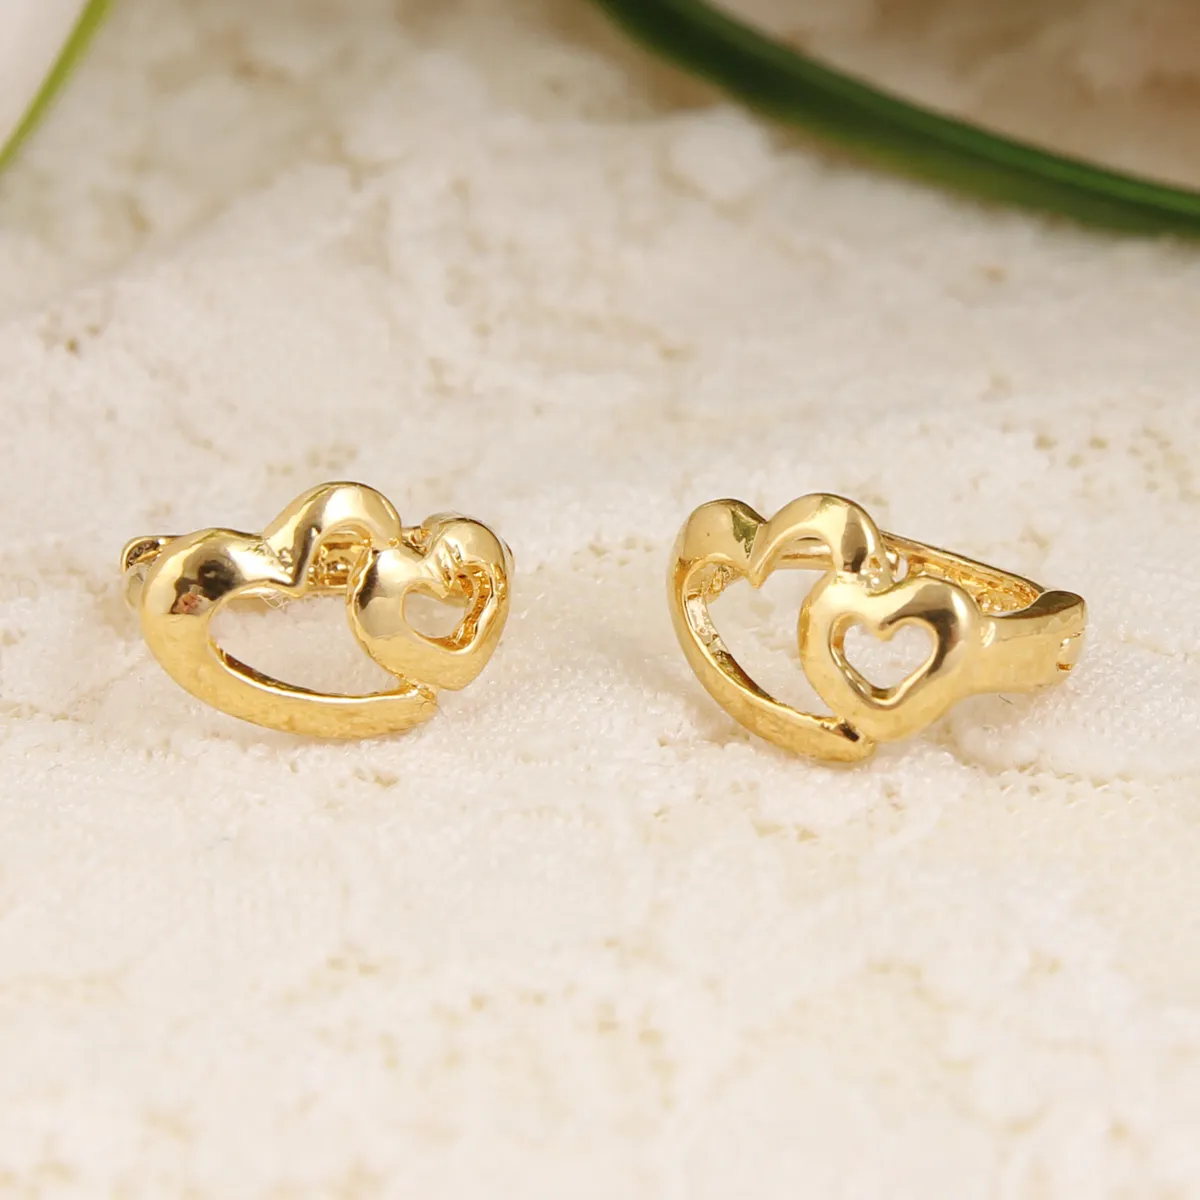 Gold Filled 3 Heart Connect Heart Drop Earrings Trendy Fashion Jewelry For  Women, Perfect Gift For African And Middle Eastern Lovers From  Wwwabcdefg886, $2.11 | DHgate.Com